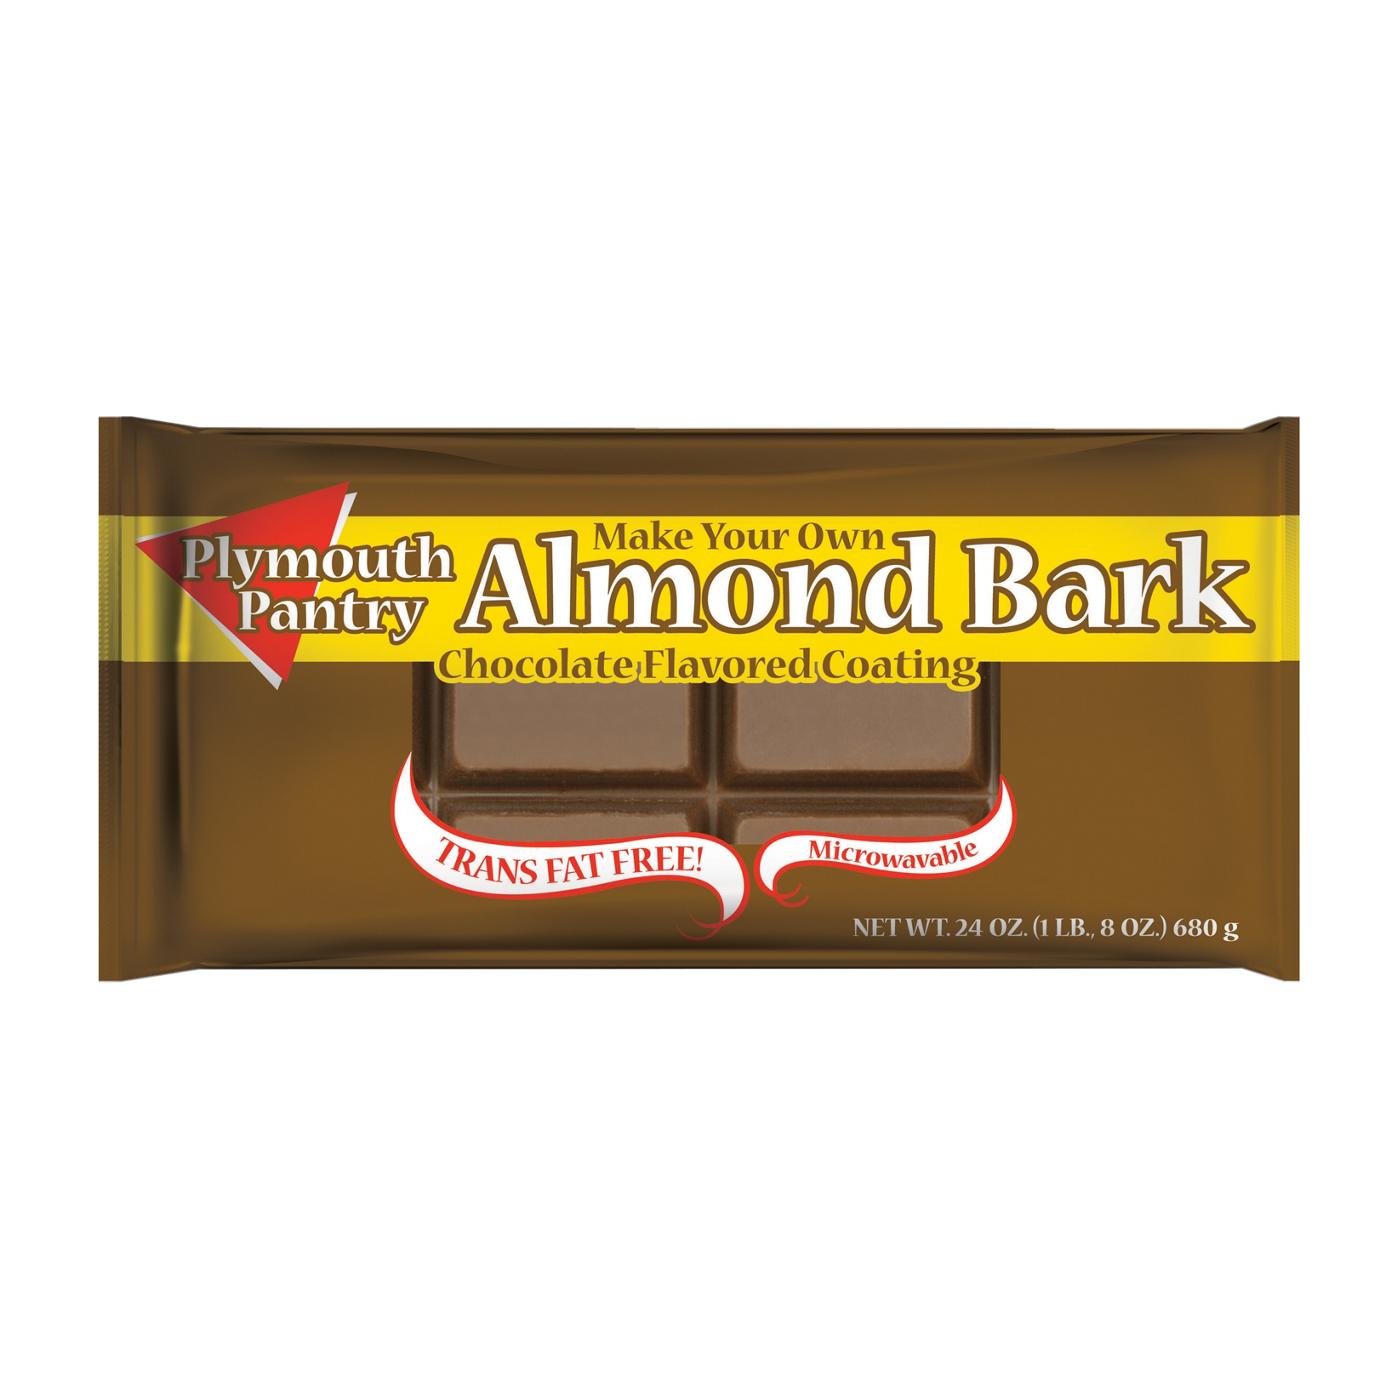 Plymouth Pantry Chocolate Flavored Coating Almond Bark; image 1 of 2